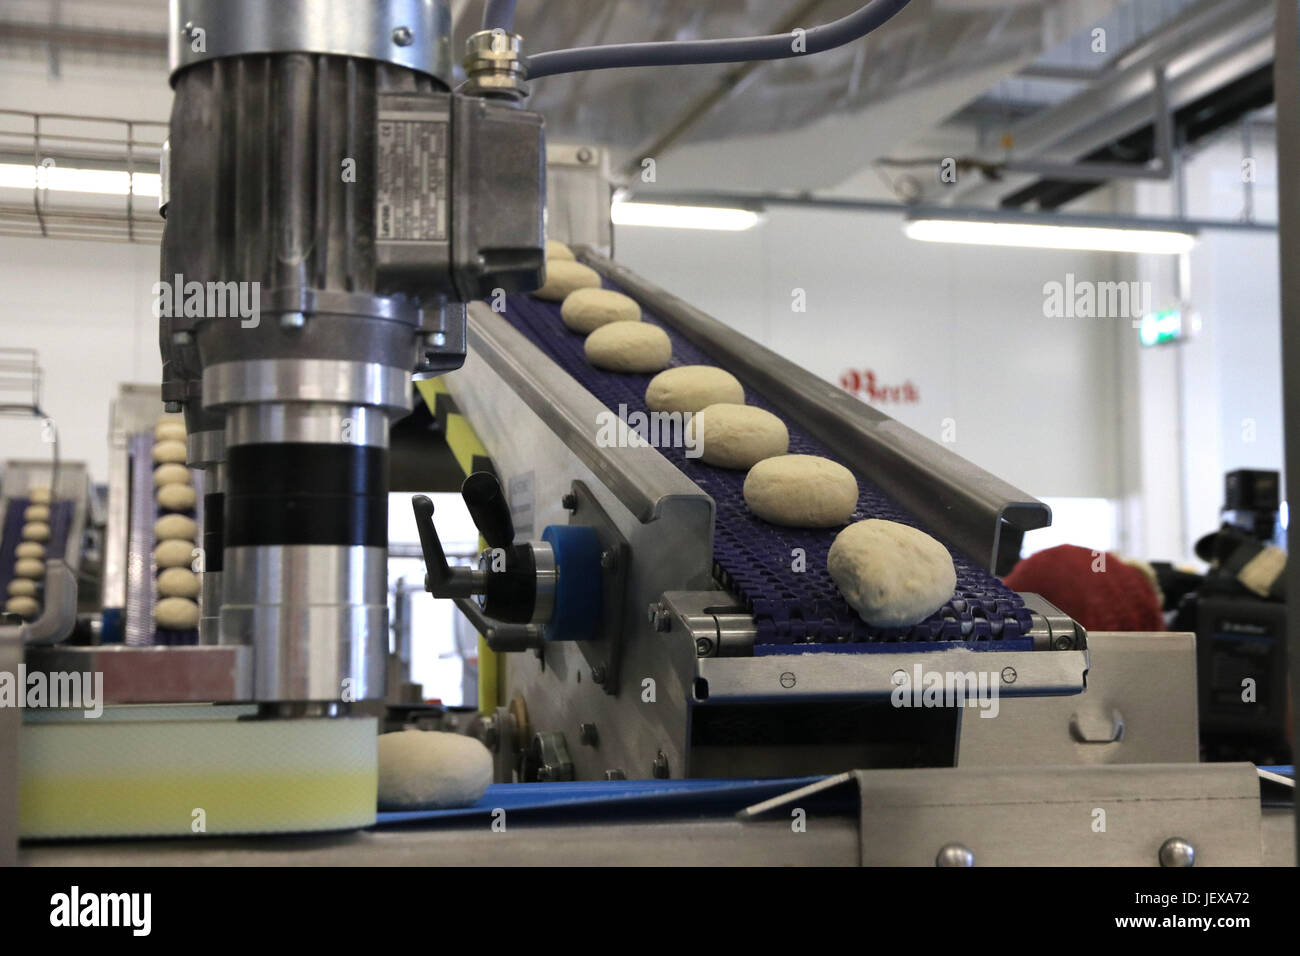 Erlangen, Germany. 28th June, 2017. The production room of the Der Beck bakery in Erlangen, Germany, 28 June 2017. A request by Foodwatch that authorities make public the results of health and safety inspections was granted. Sixty-nine controls in the state of Bavaria between 2013 and 2016 showed that each of the eight major bakeries had hygiene problems. The three bakeries which were named had the worst problems. The bakeries claim to have improved their standards. Photo: Ferdinand Merzbach/dpa/Alamy Live News Stock Photo